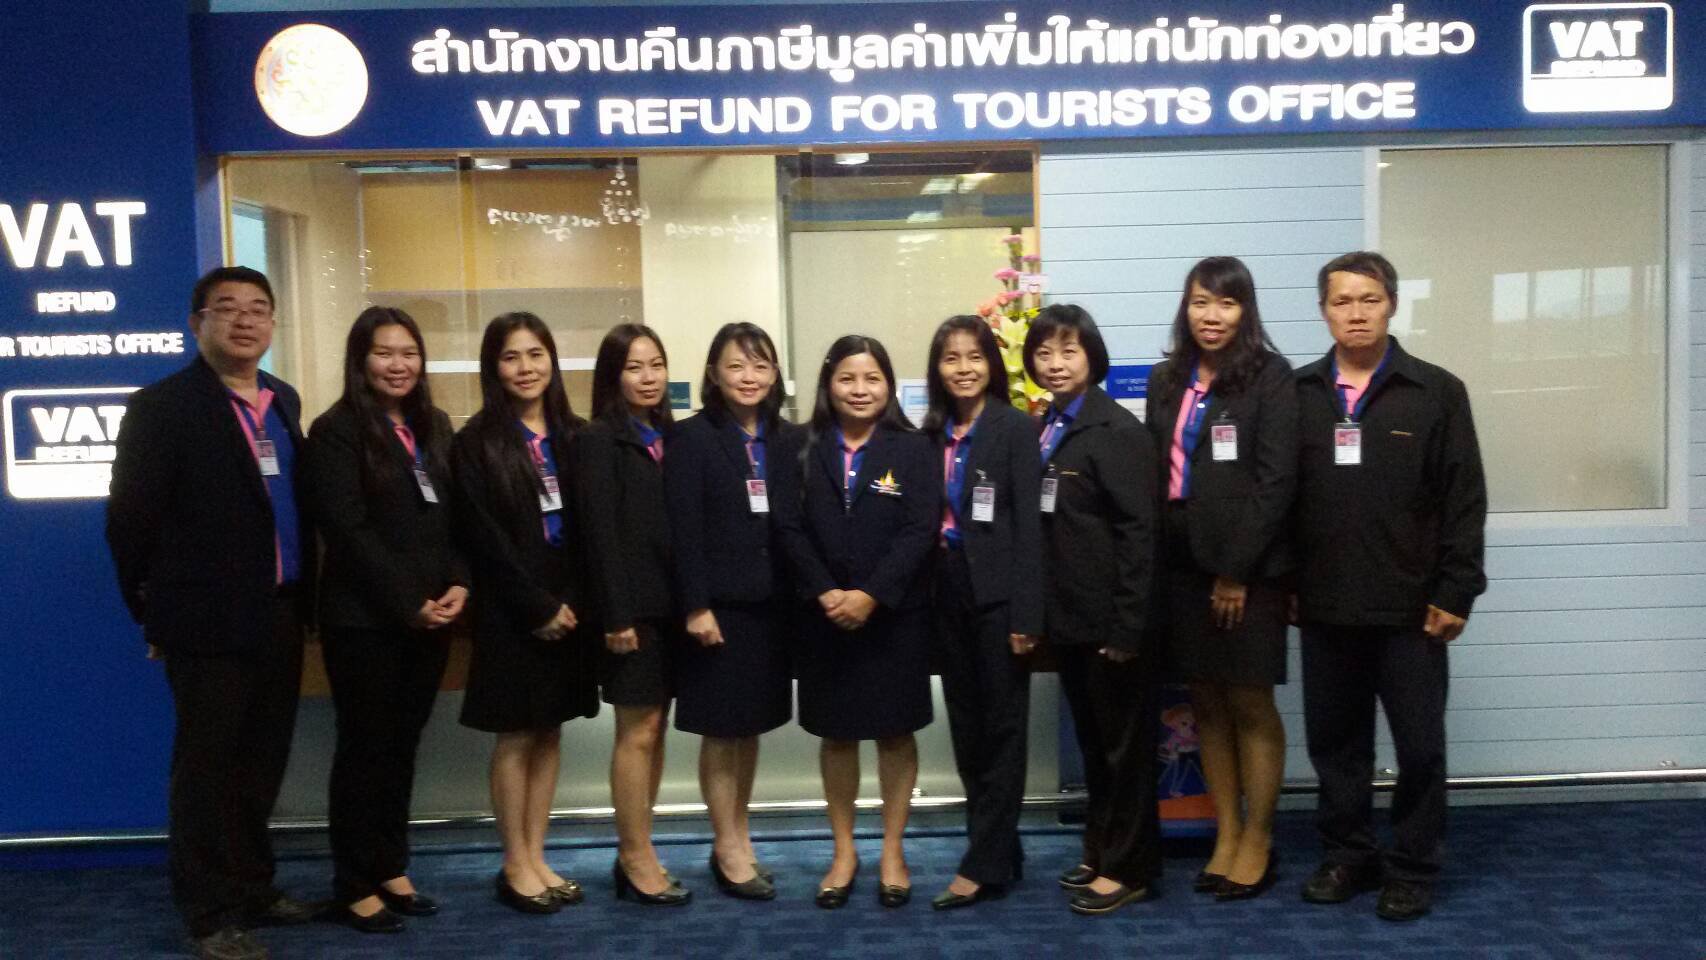 The VAT Refund for Tourists opened the refund counters at Mae Fah Luang - Chiang Rai International Airport.